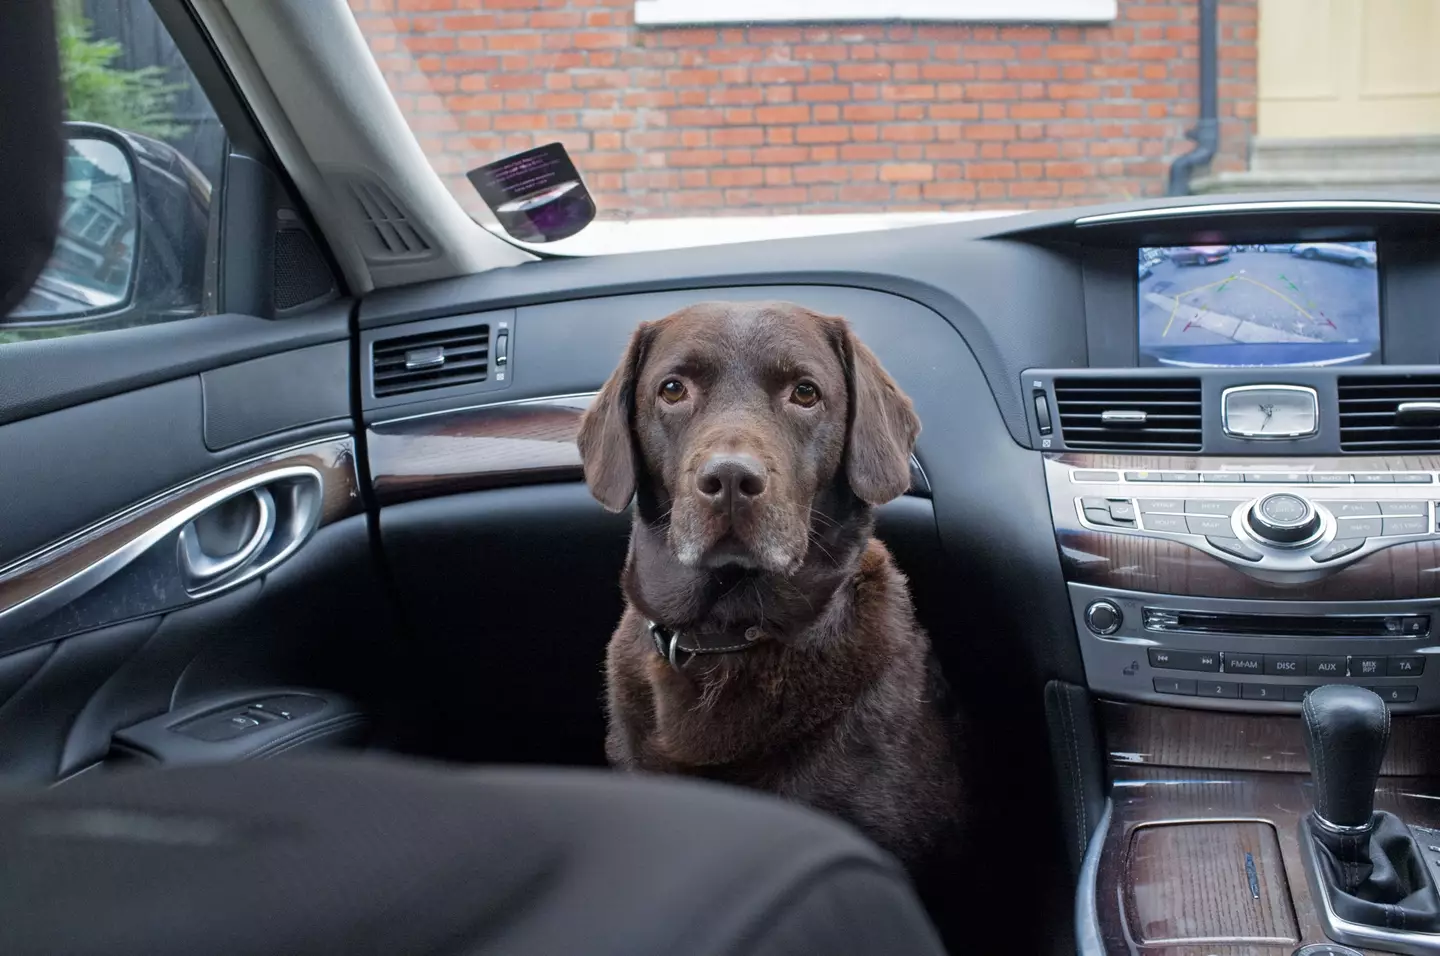 As per Rule 57 of the Highway Code, pets must be 'suitably restrained' while travelling in the car.